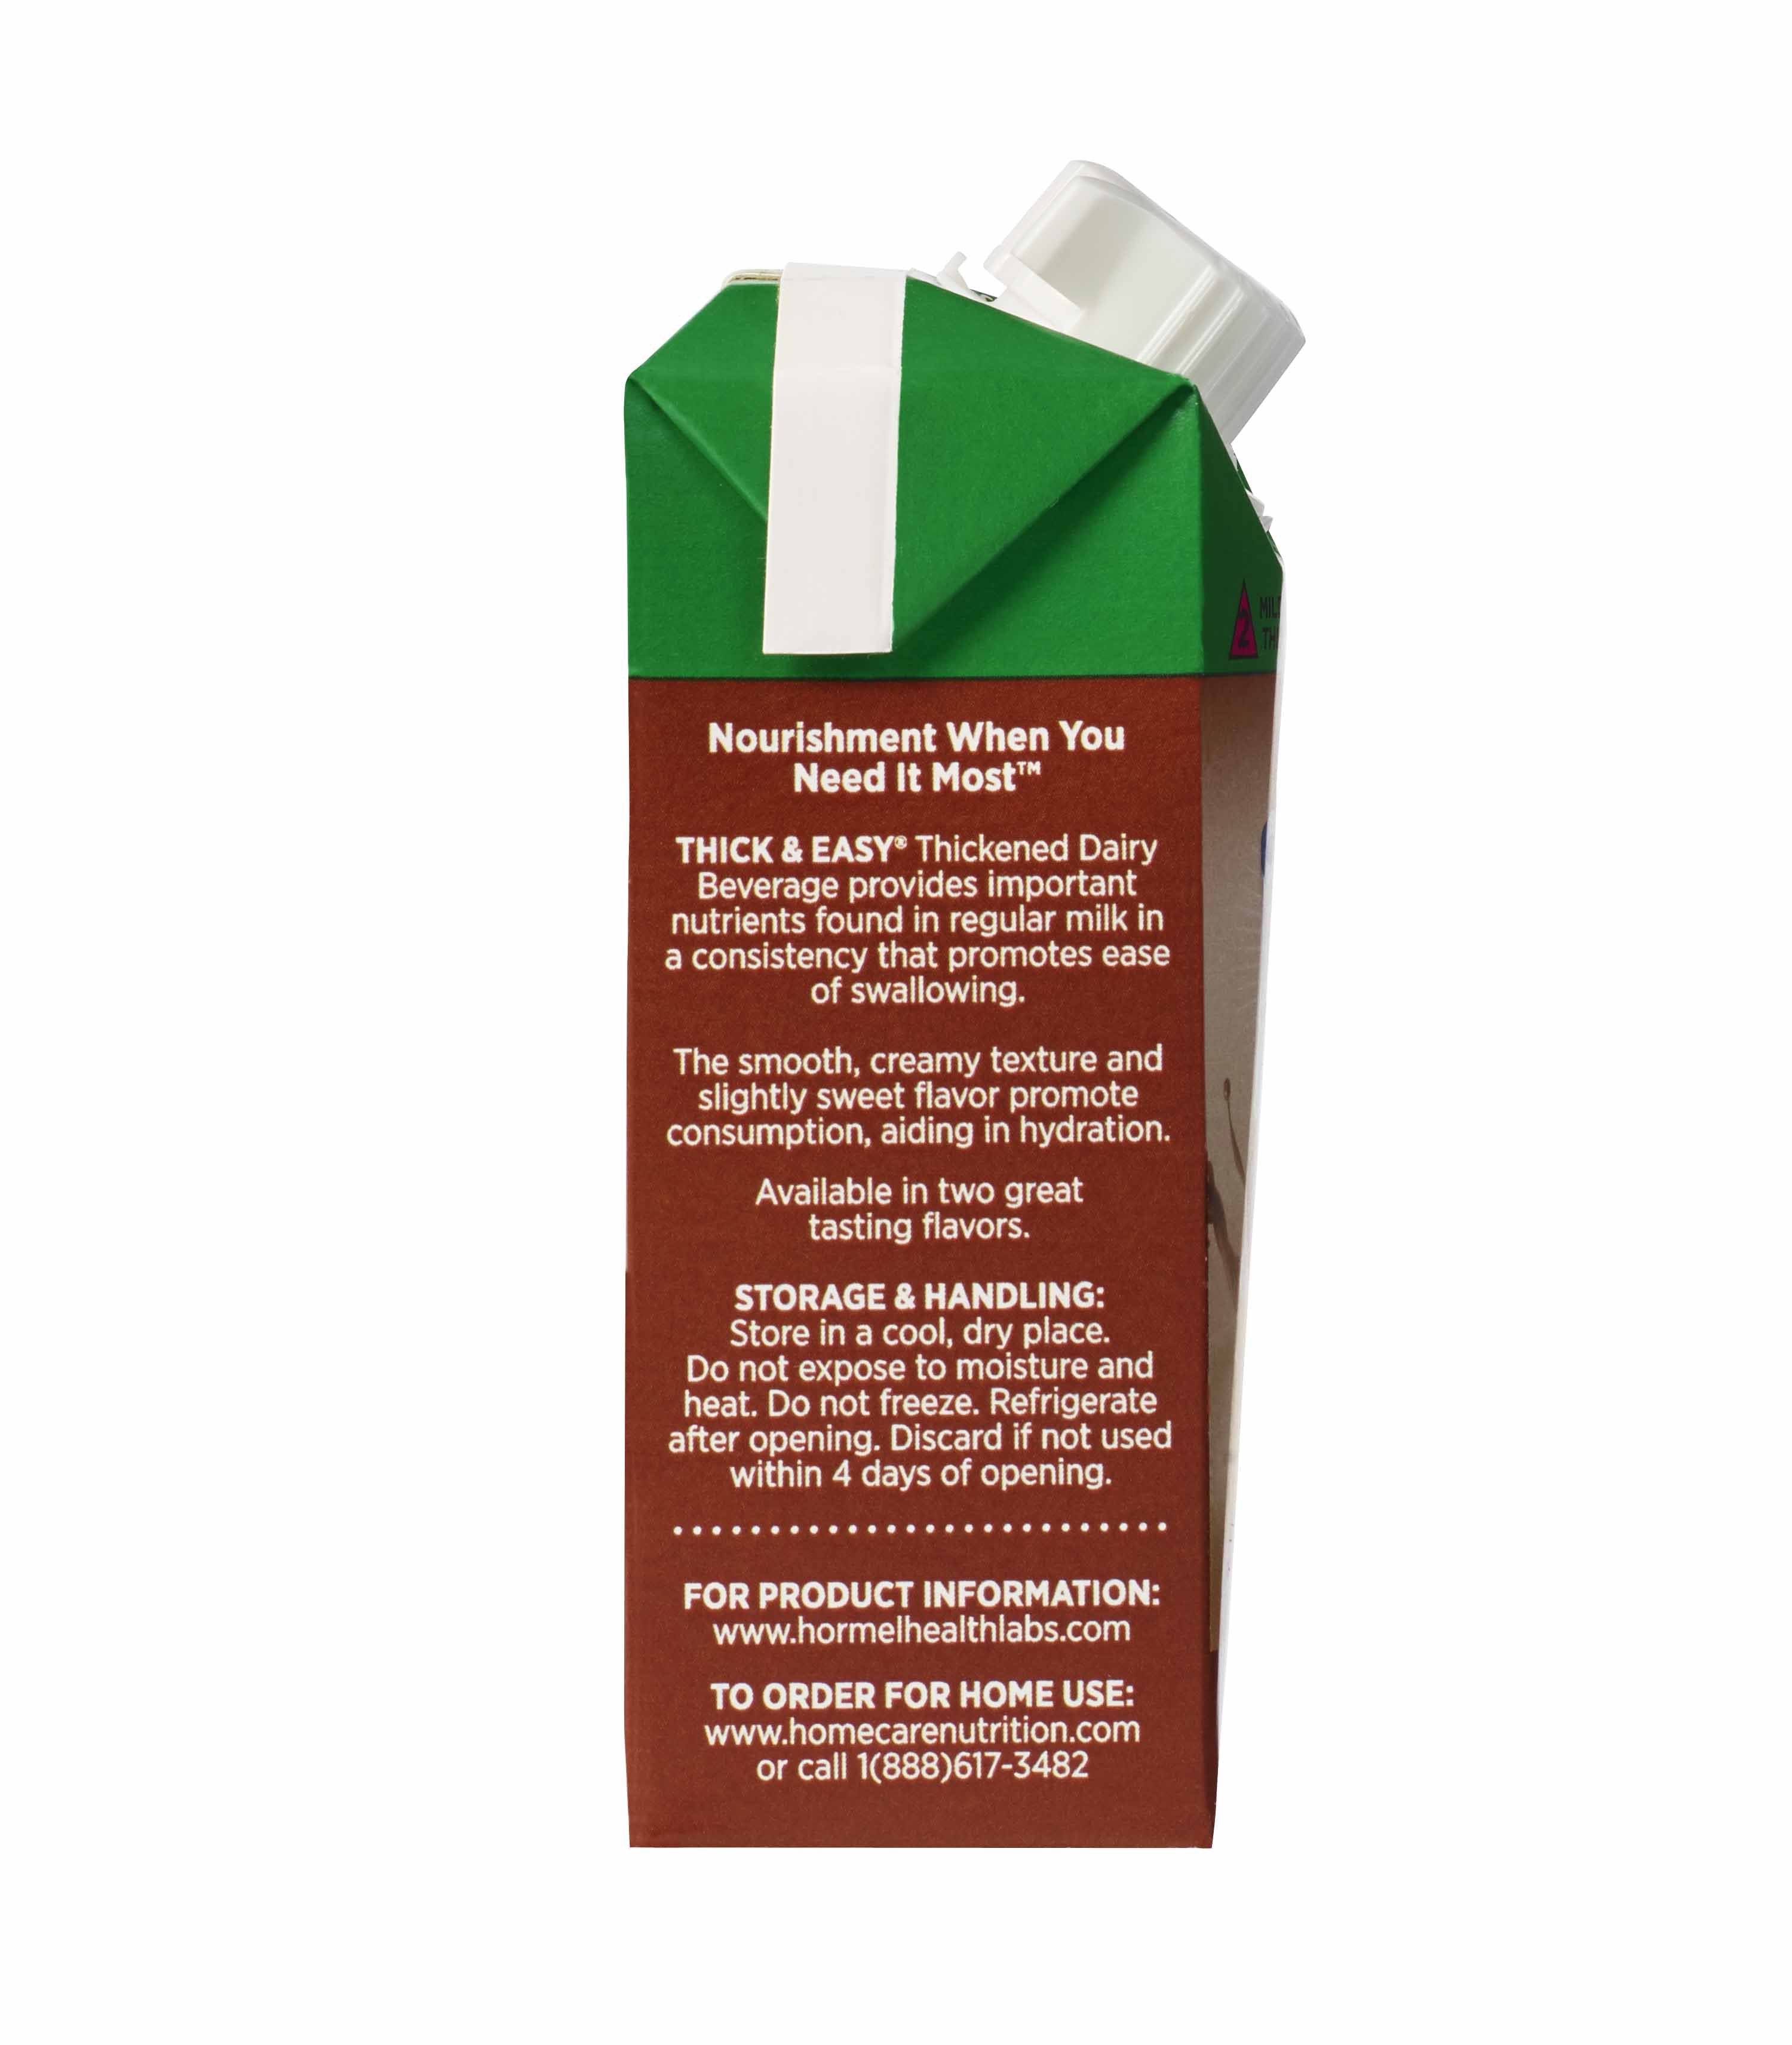 Thickened Beverage Thick & Easy Dairy 8 oz. Carton Chocolate Flavor Liquid IDDSI Level 2 Mildly Thick